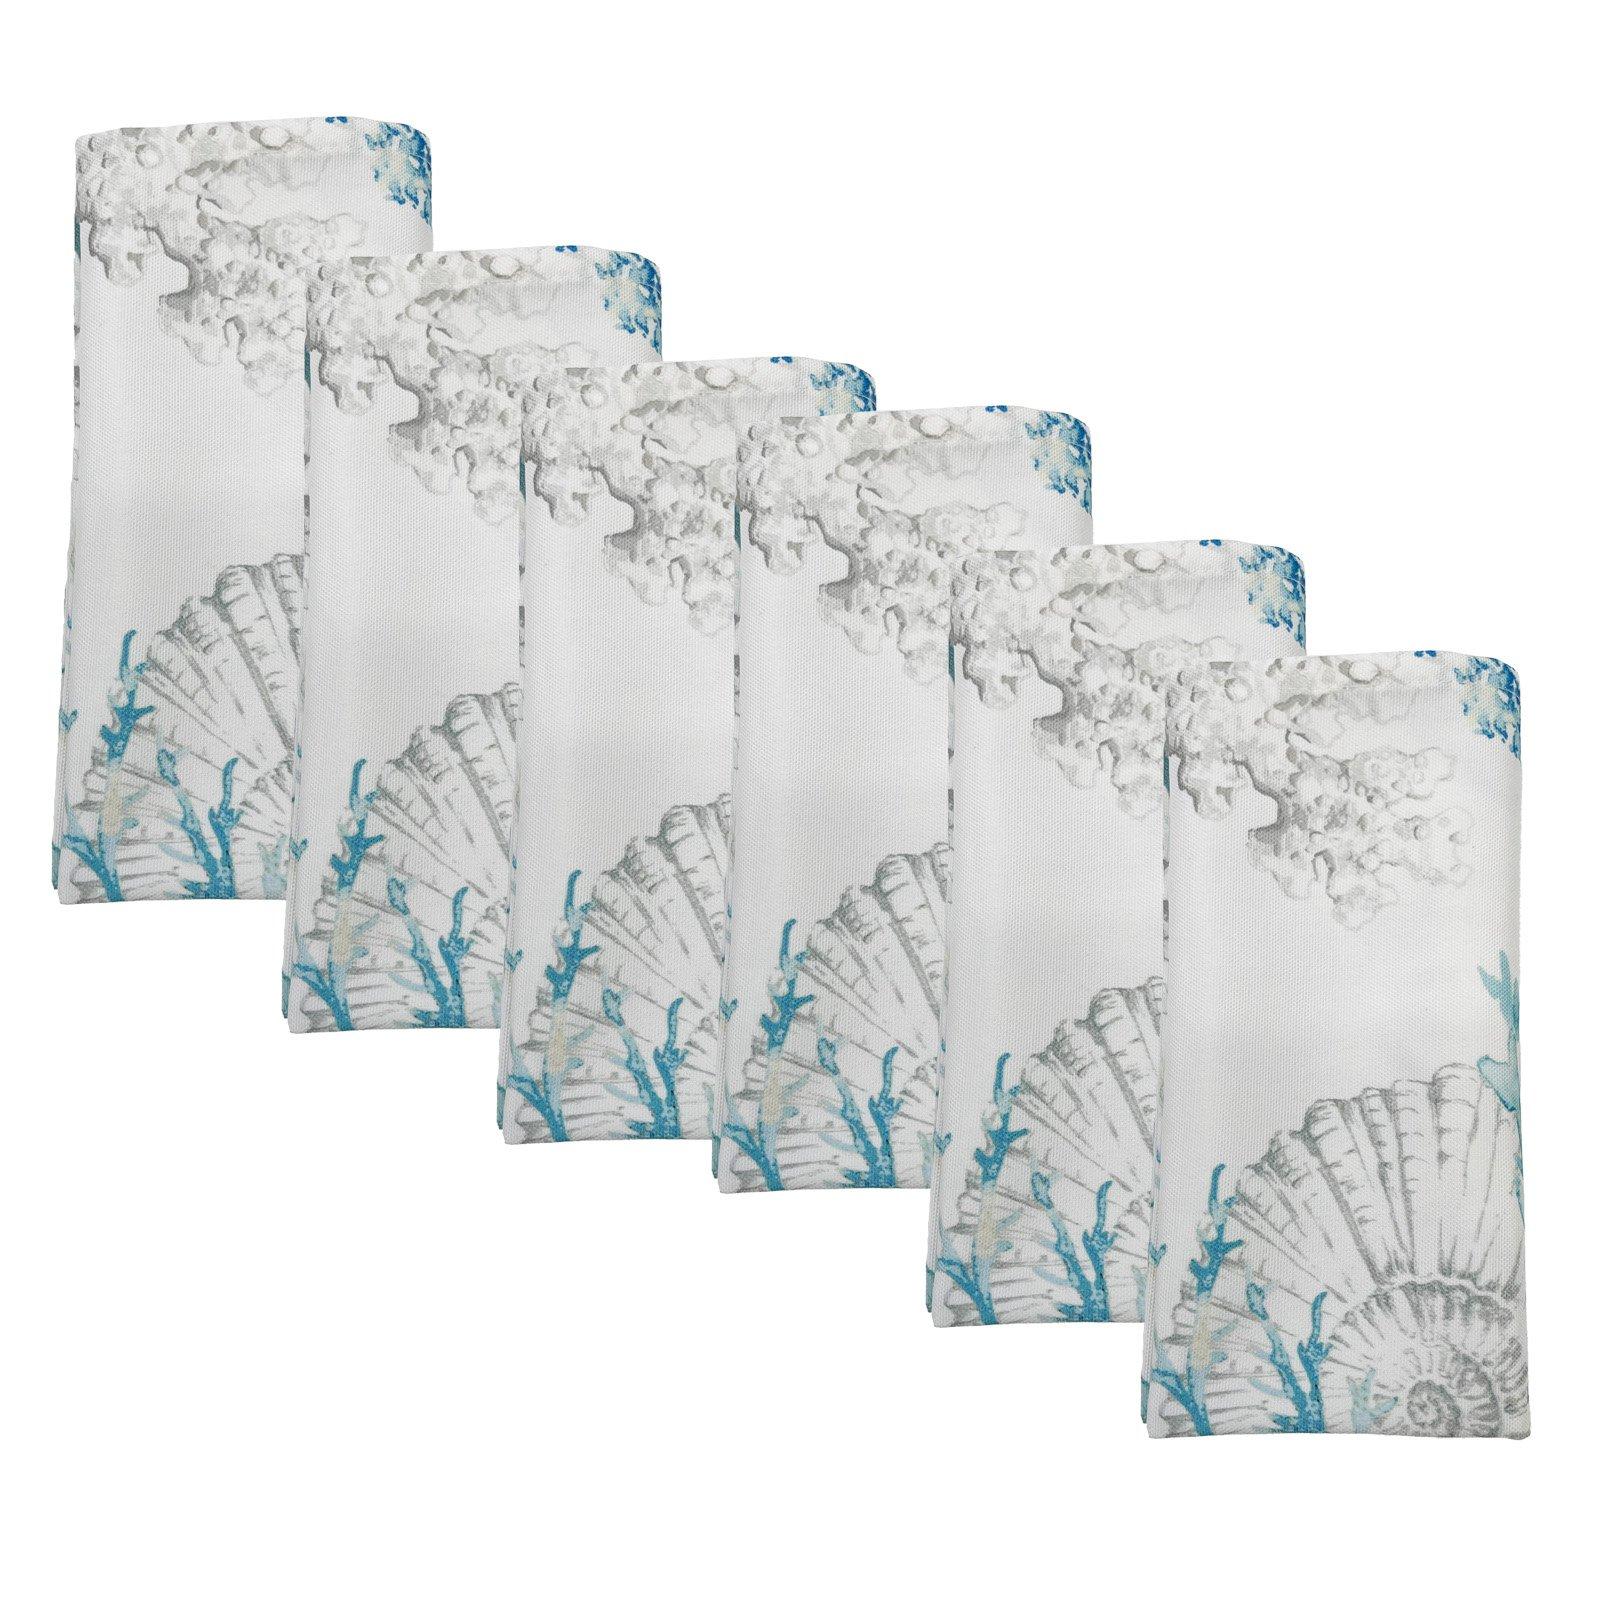 6 Pk Clearwater Cloth Napkins